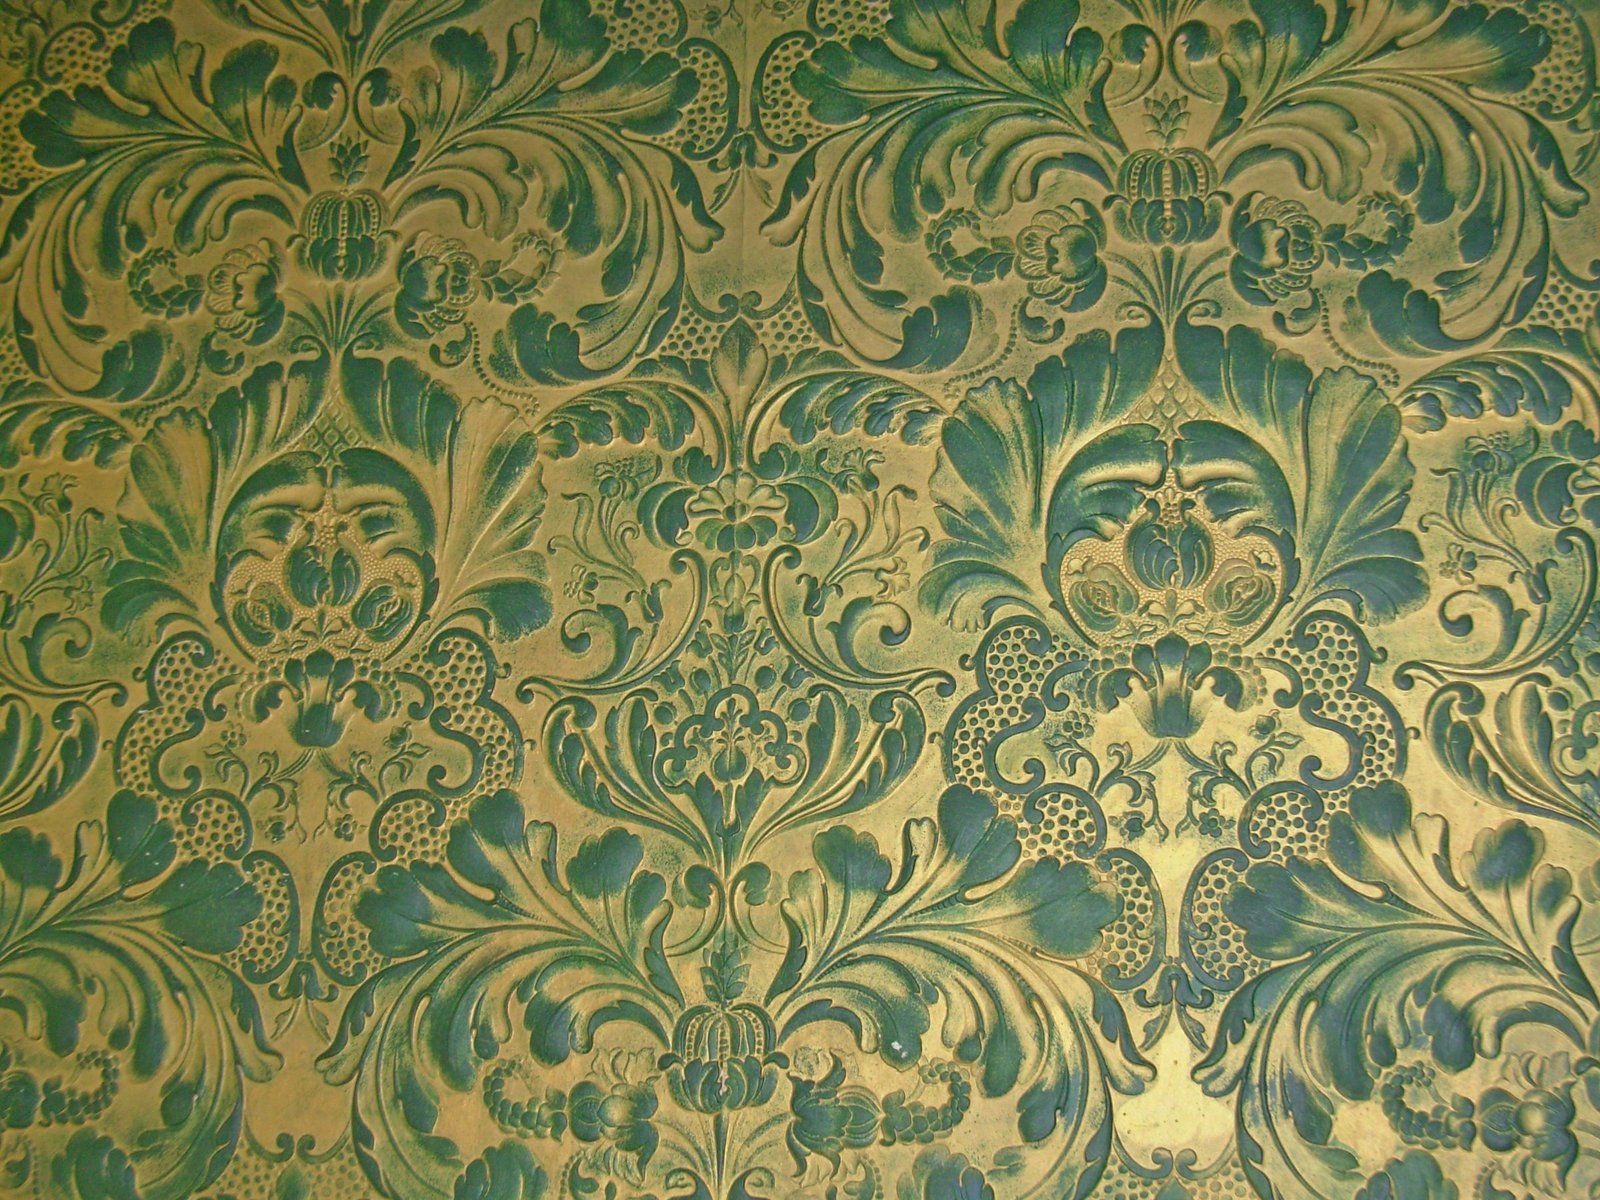 a gold colored wall with blue and green designs